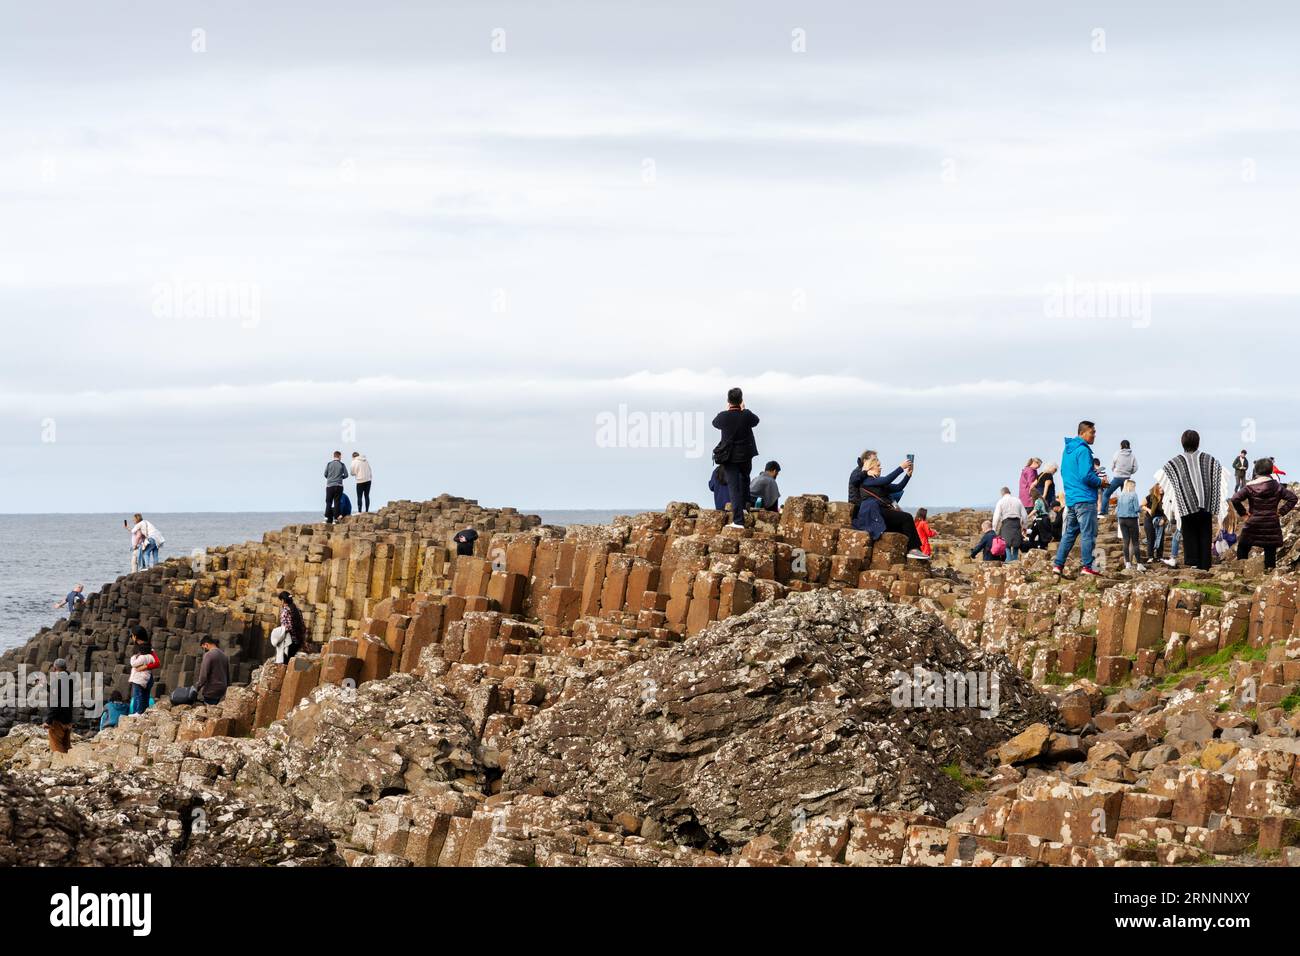 Giant's Causeway, near Bushmills, northern Ireland. Visitors to the natural basalt rock formations, which are a popular tourist attraction. Stock Photo